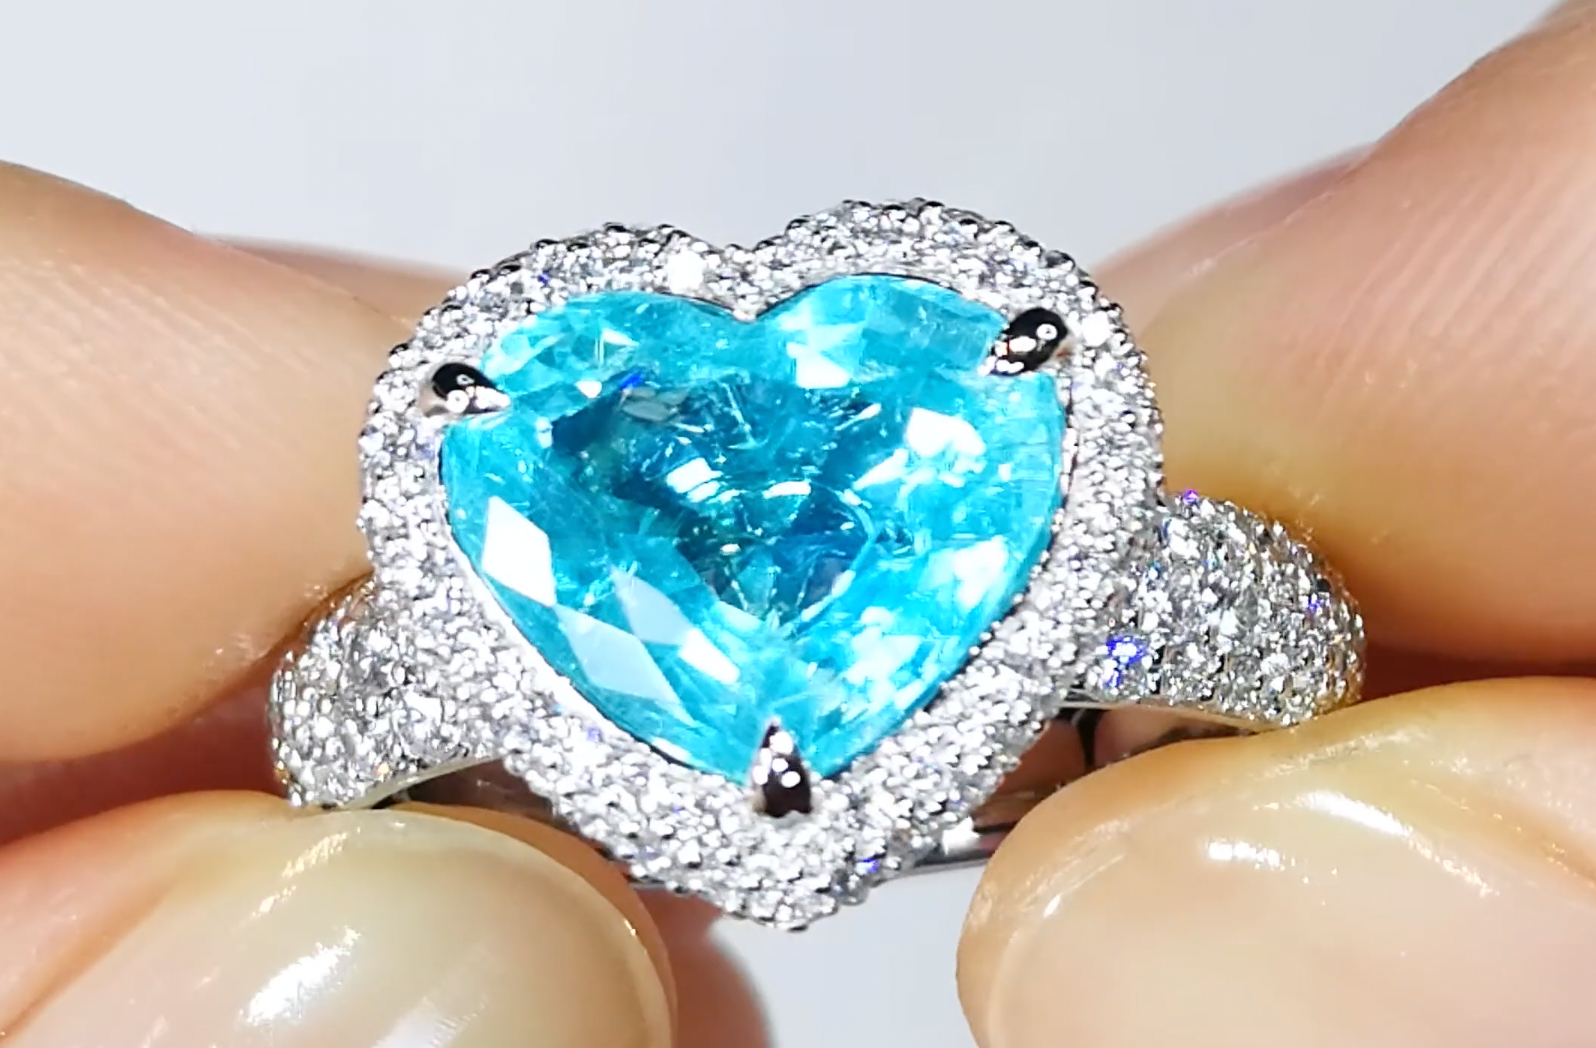 Neon Paraiba Tourmaline Ring with D Flawless Diamonds set in 18K White Gold